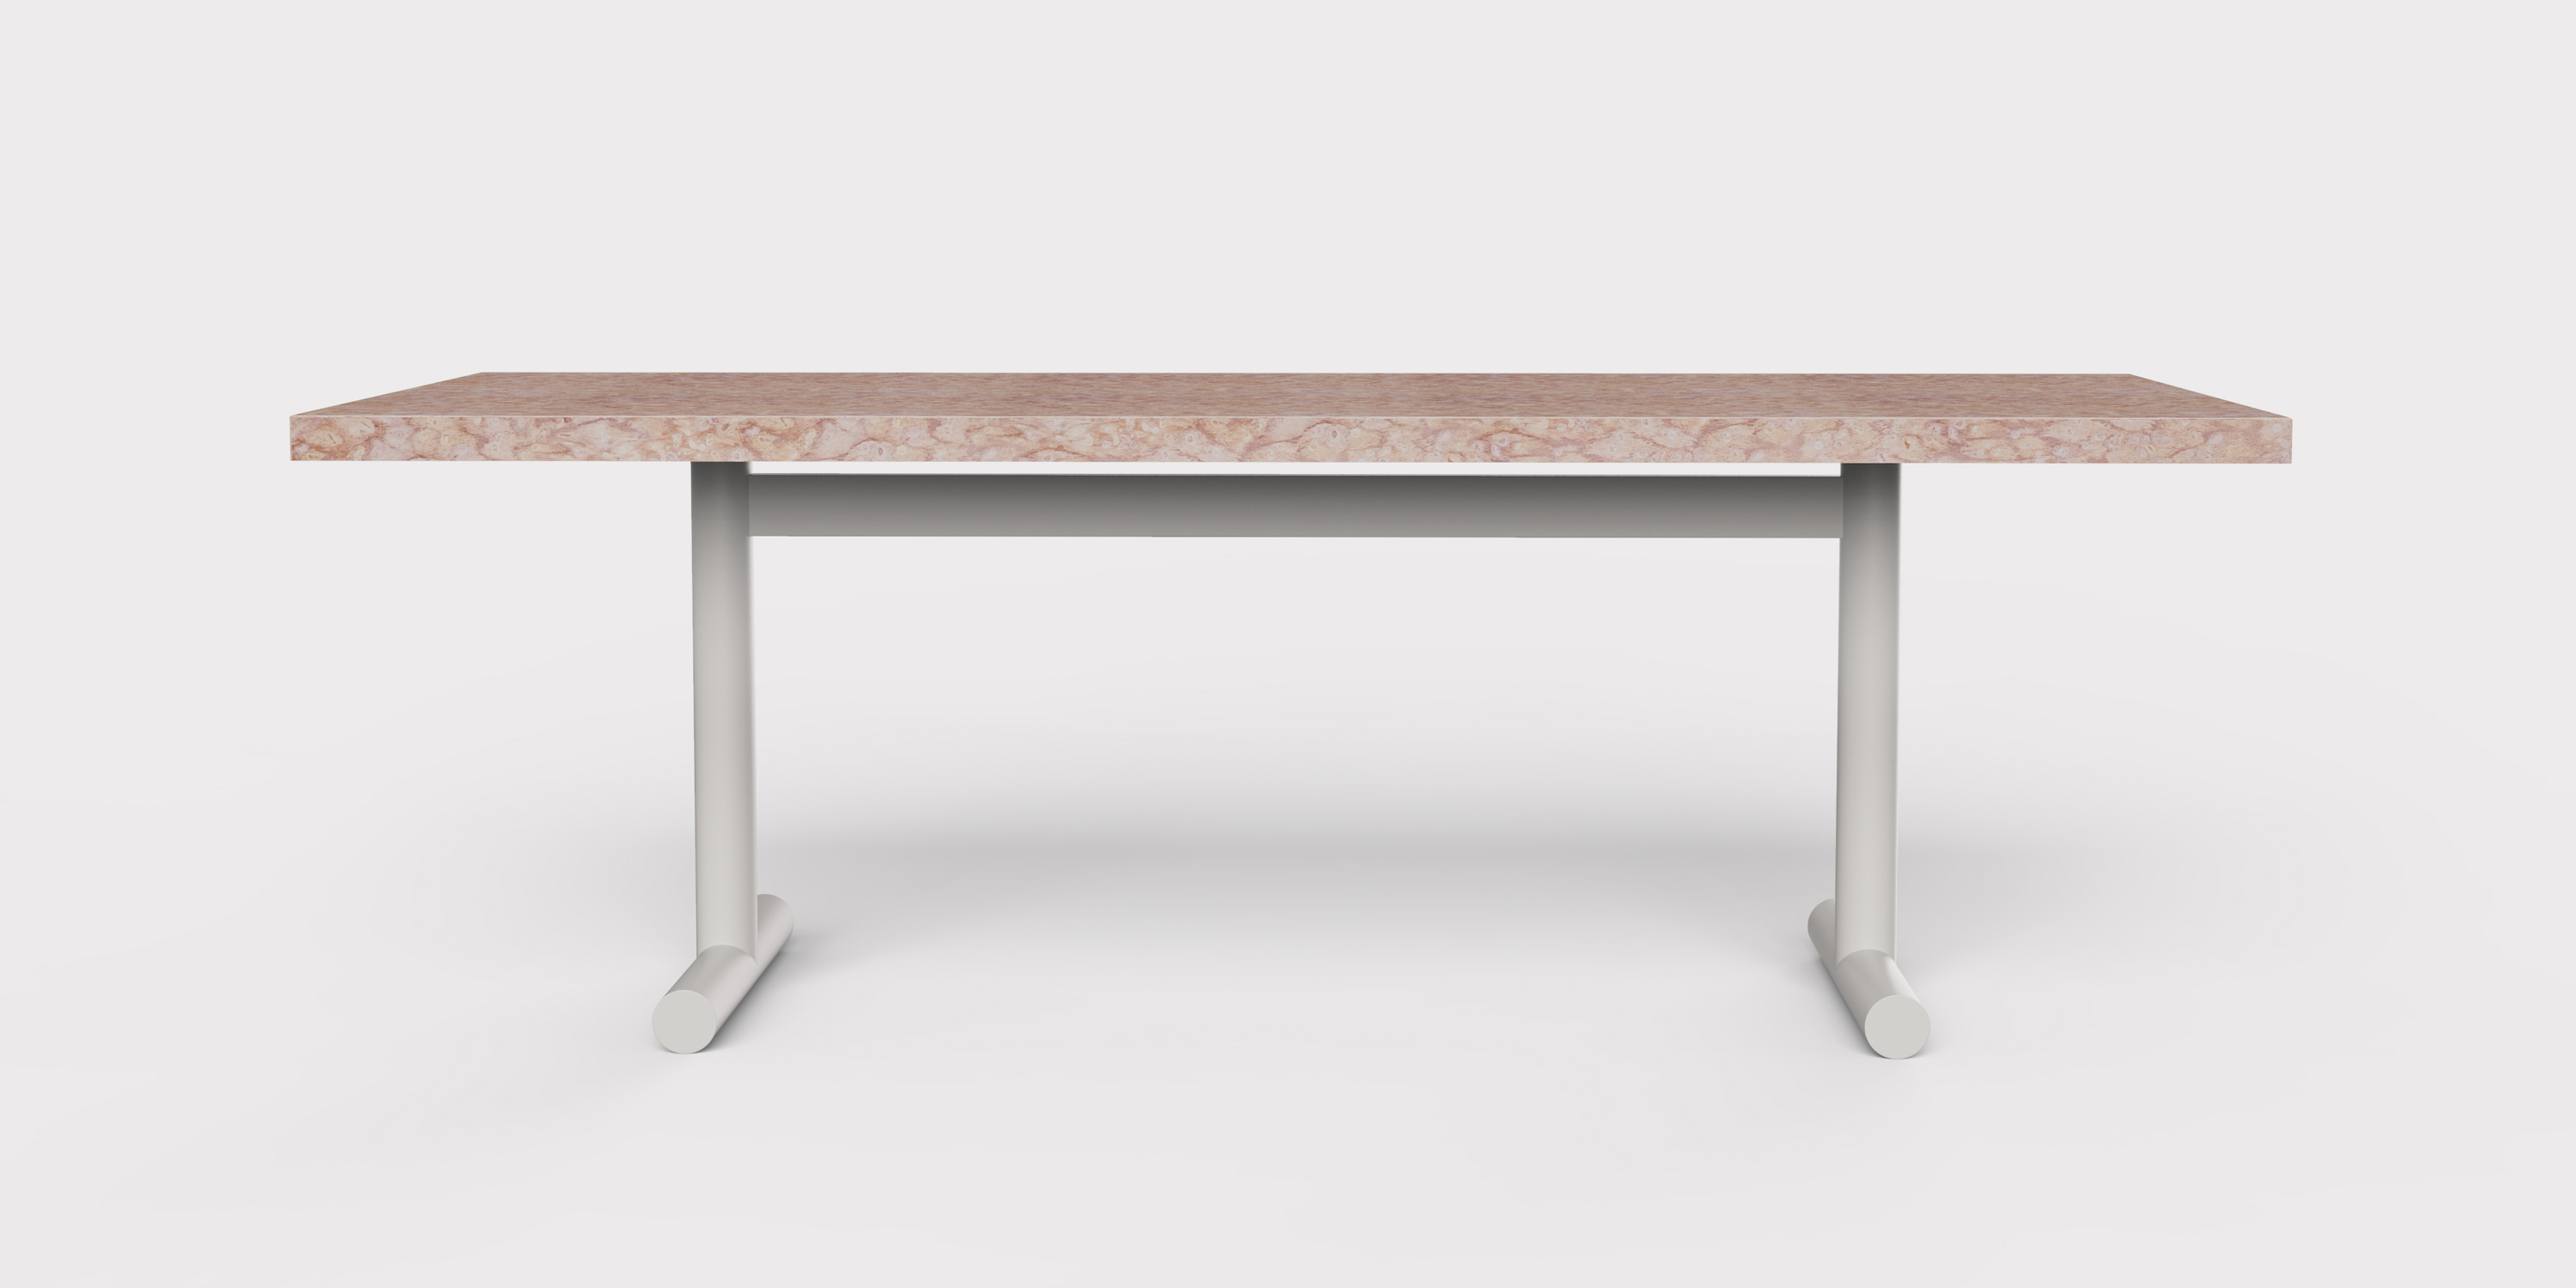 OSIS Table Top Large Beige Hues